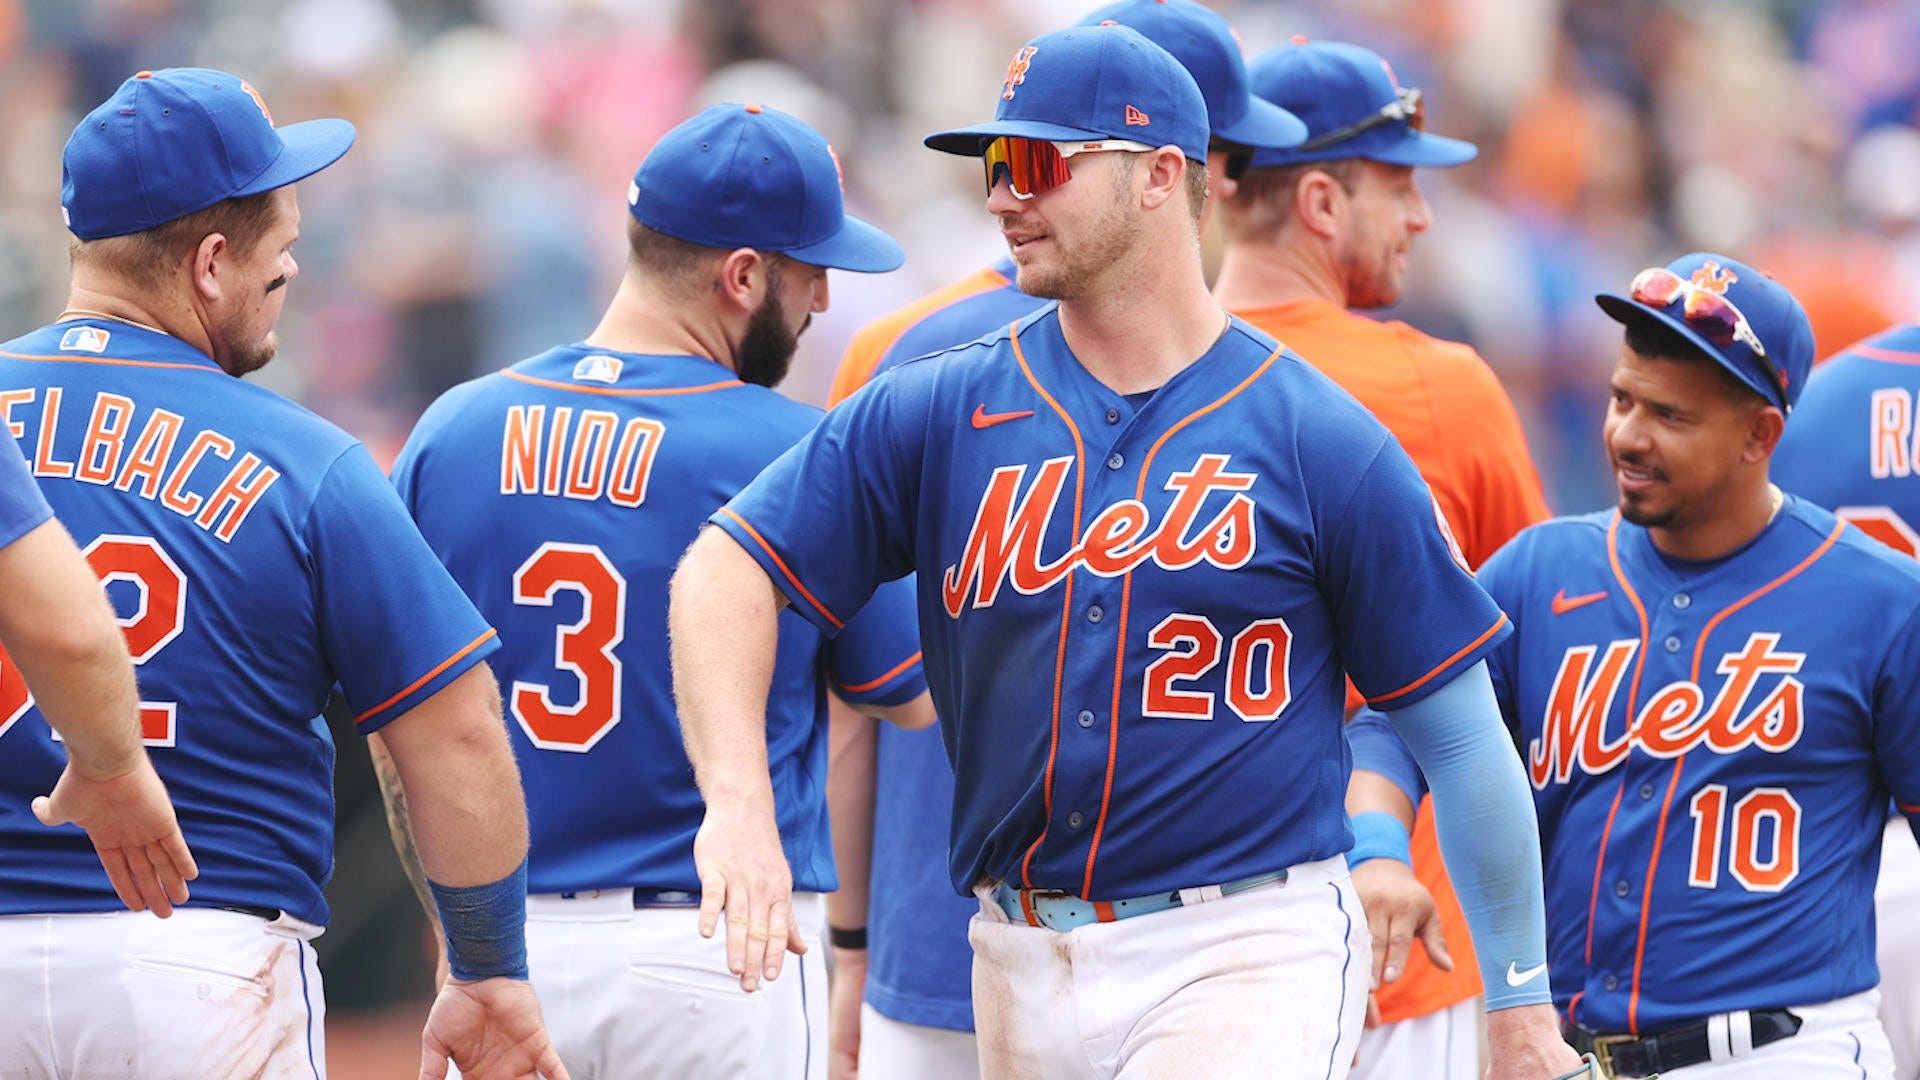 3 Up, 3 Down: Mets Clinch Series Against Red-Hot Mariners